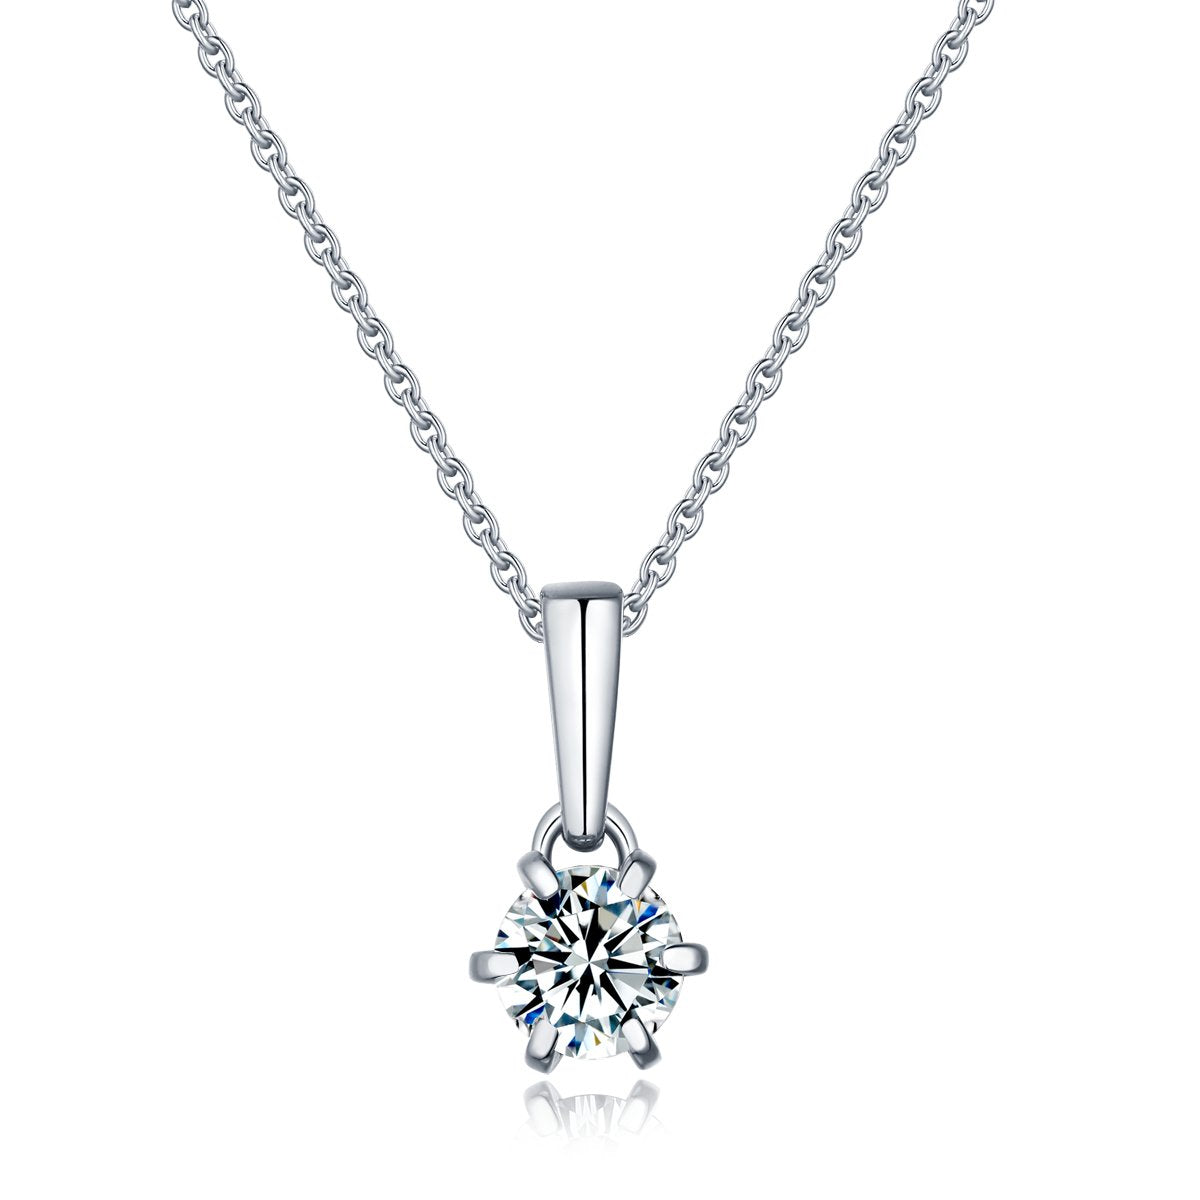 Rhea 6 Prong Moissanite Necklace in 925 Sterling Silver